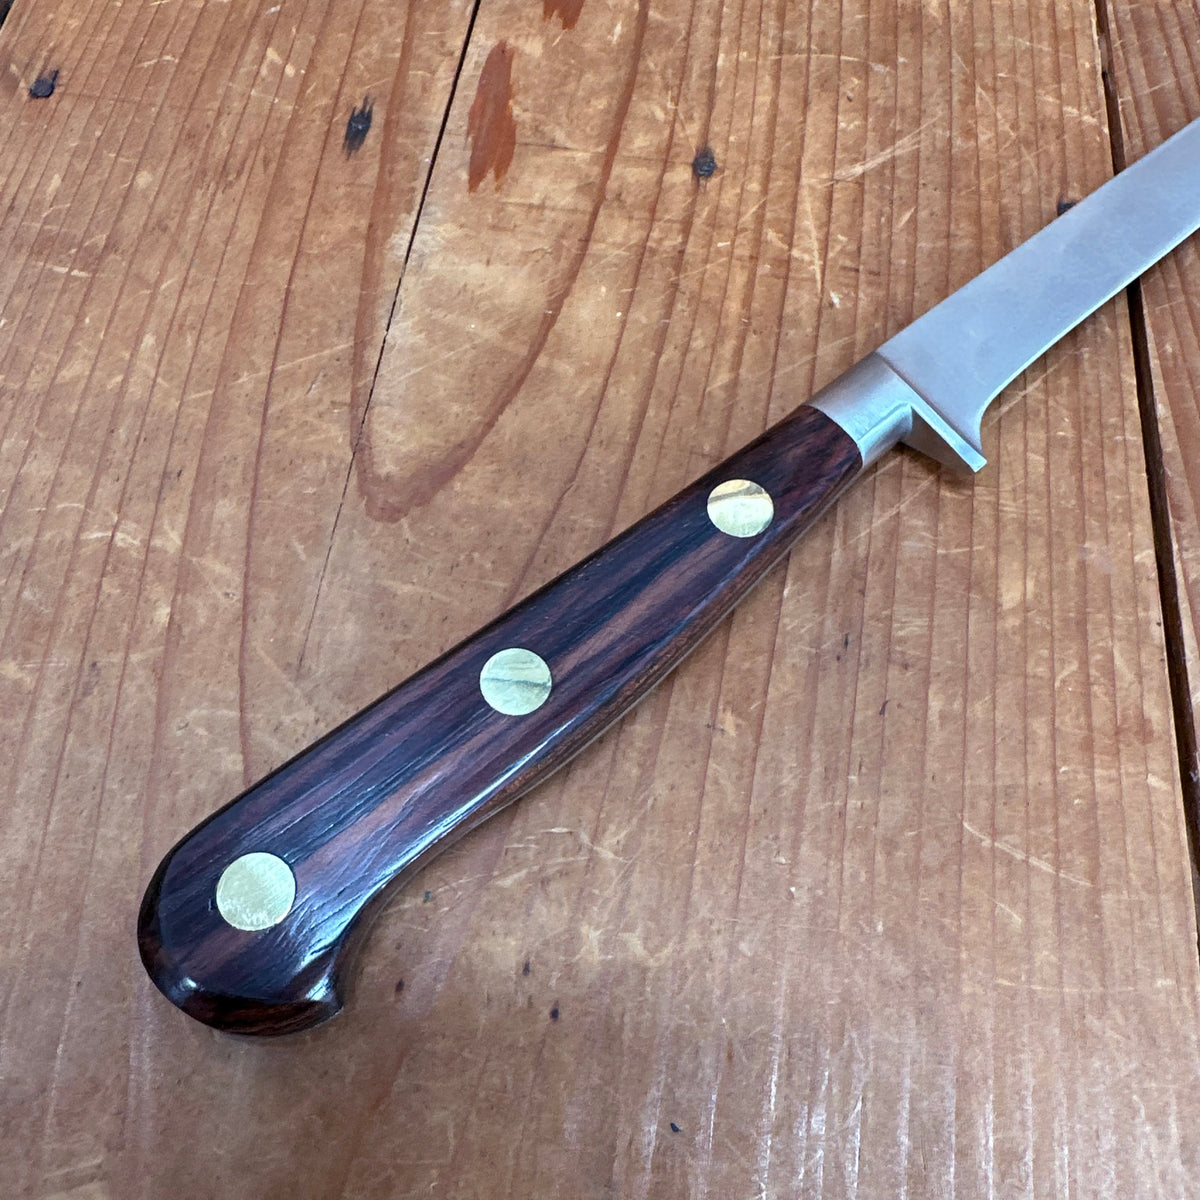 B Stock - New Vintage A Wright 4.75" Boning Knife Forged Stainless Steel Rosewood Sheffield